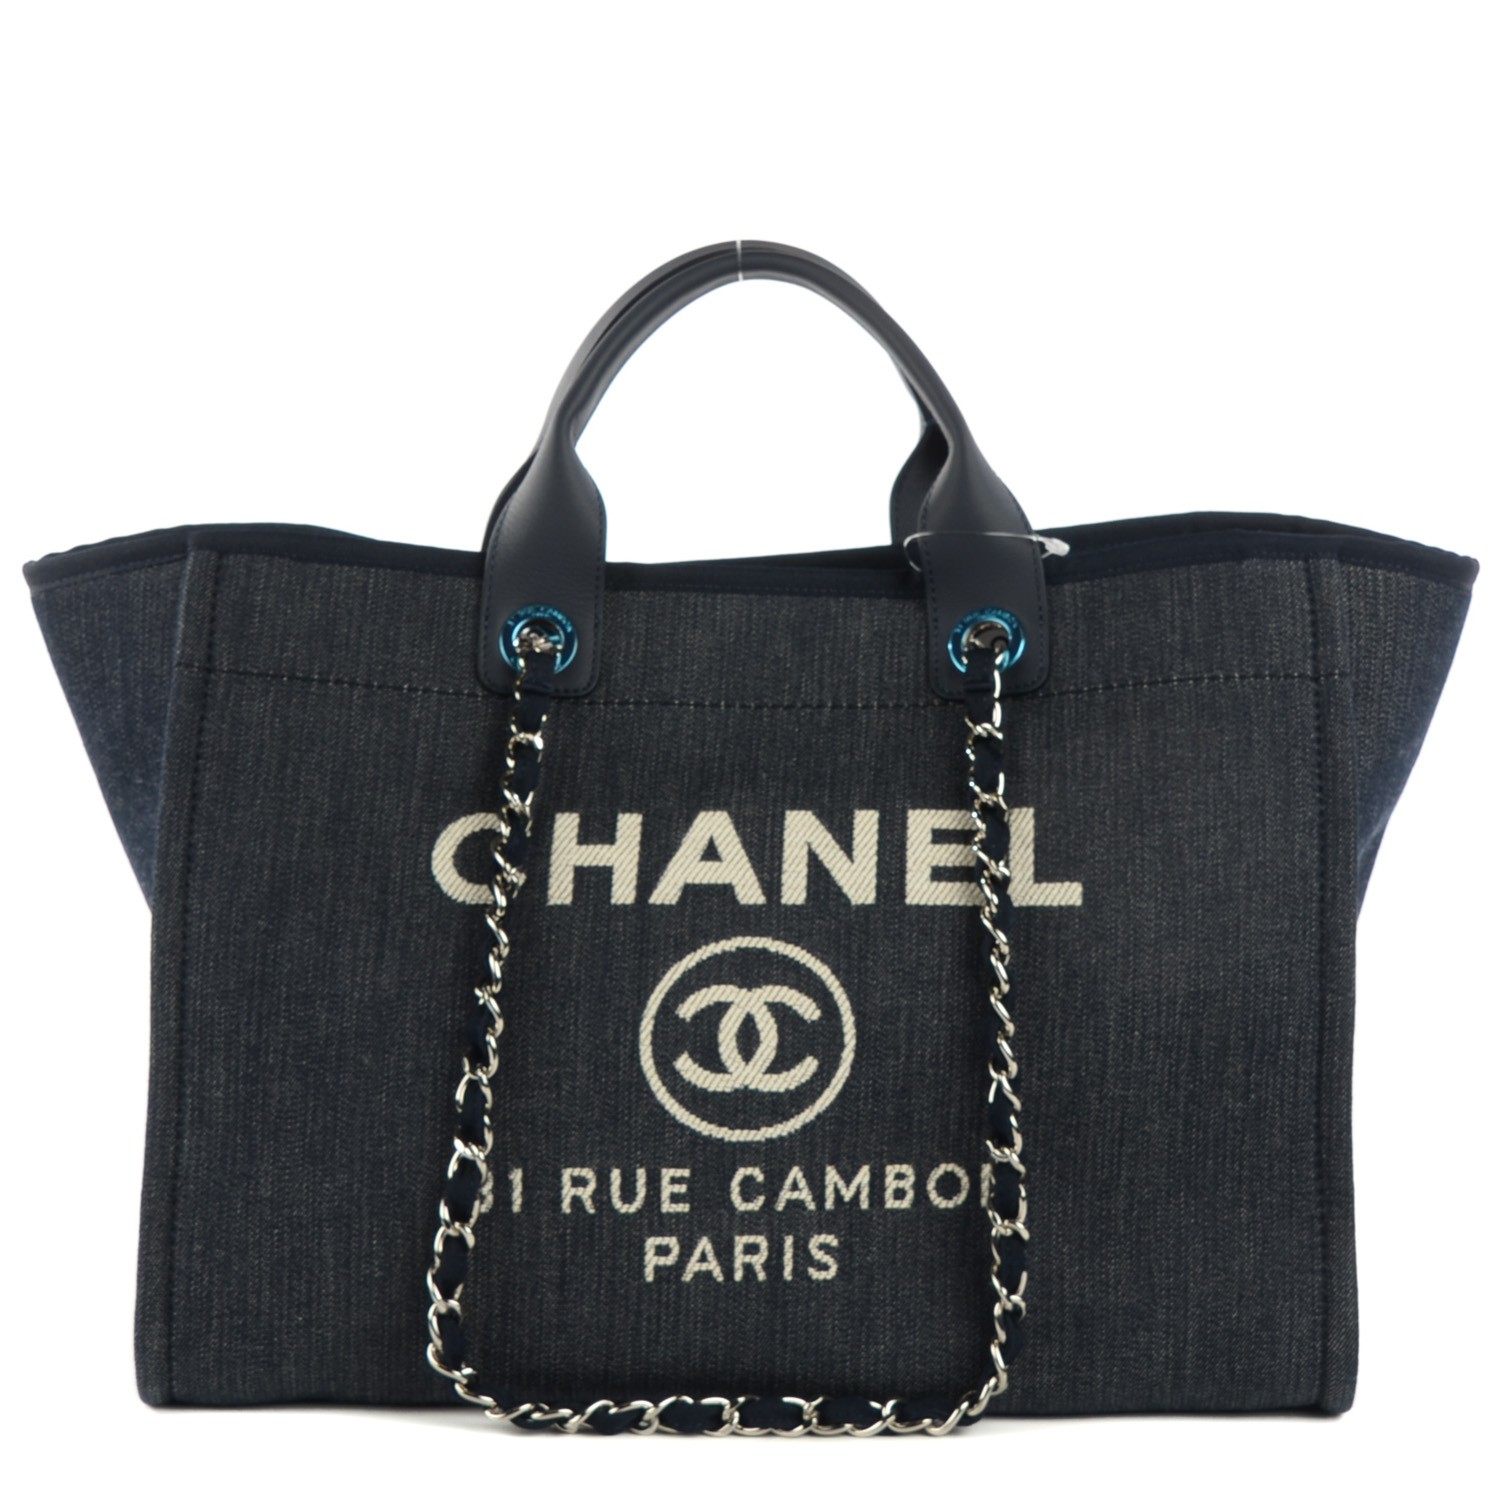 CHANEL Canvas Large Deauville Tote Dark Blue 117613